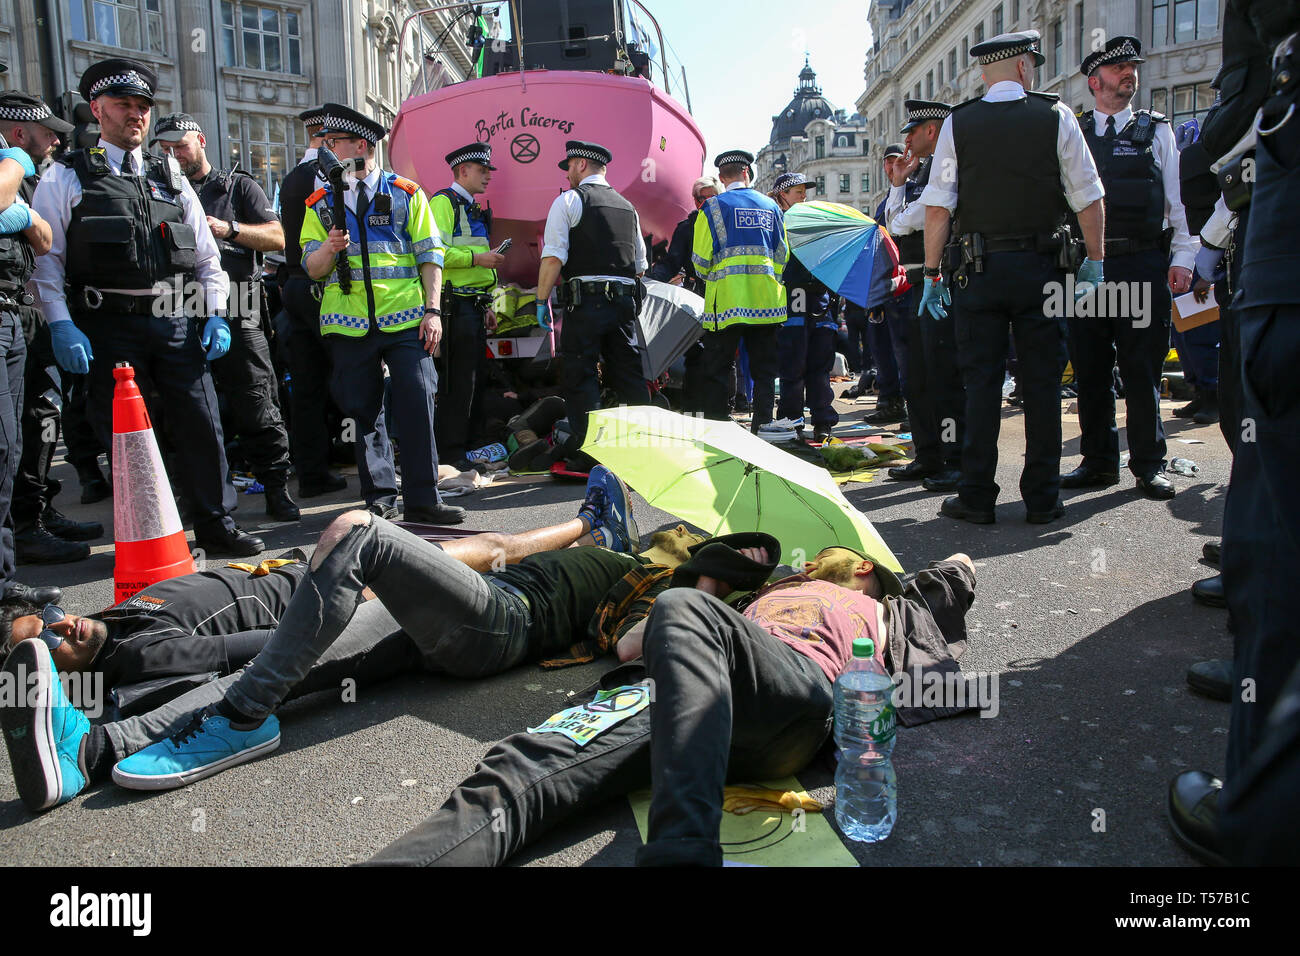 Environmental activists are seen lying on the ground at the Oxford Circus during the fifth day of the climate change protest by the Extinction Rebellion movement group. A large number of police presence around the pink yacht as they un-bond the activists who glued themselves and the police prepares to remove them from the site. According to the Met Police, over 1000 activists have been arrested since the demonstration started on 11 April 2019. Stock Photo